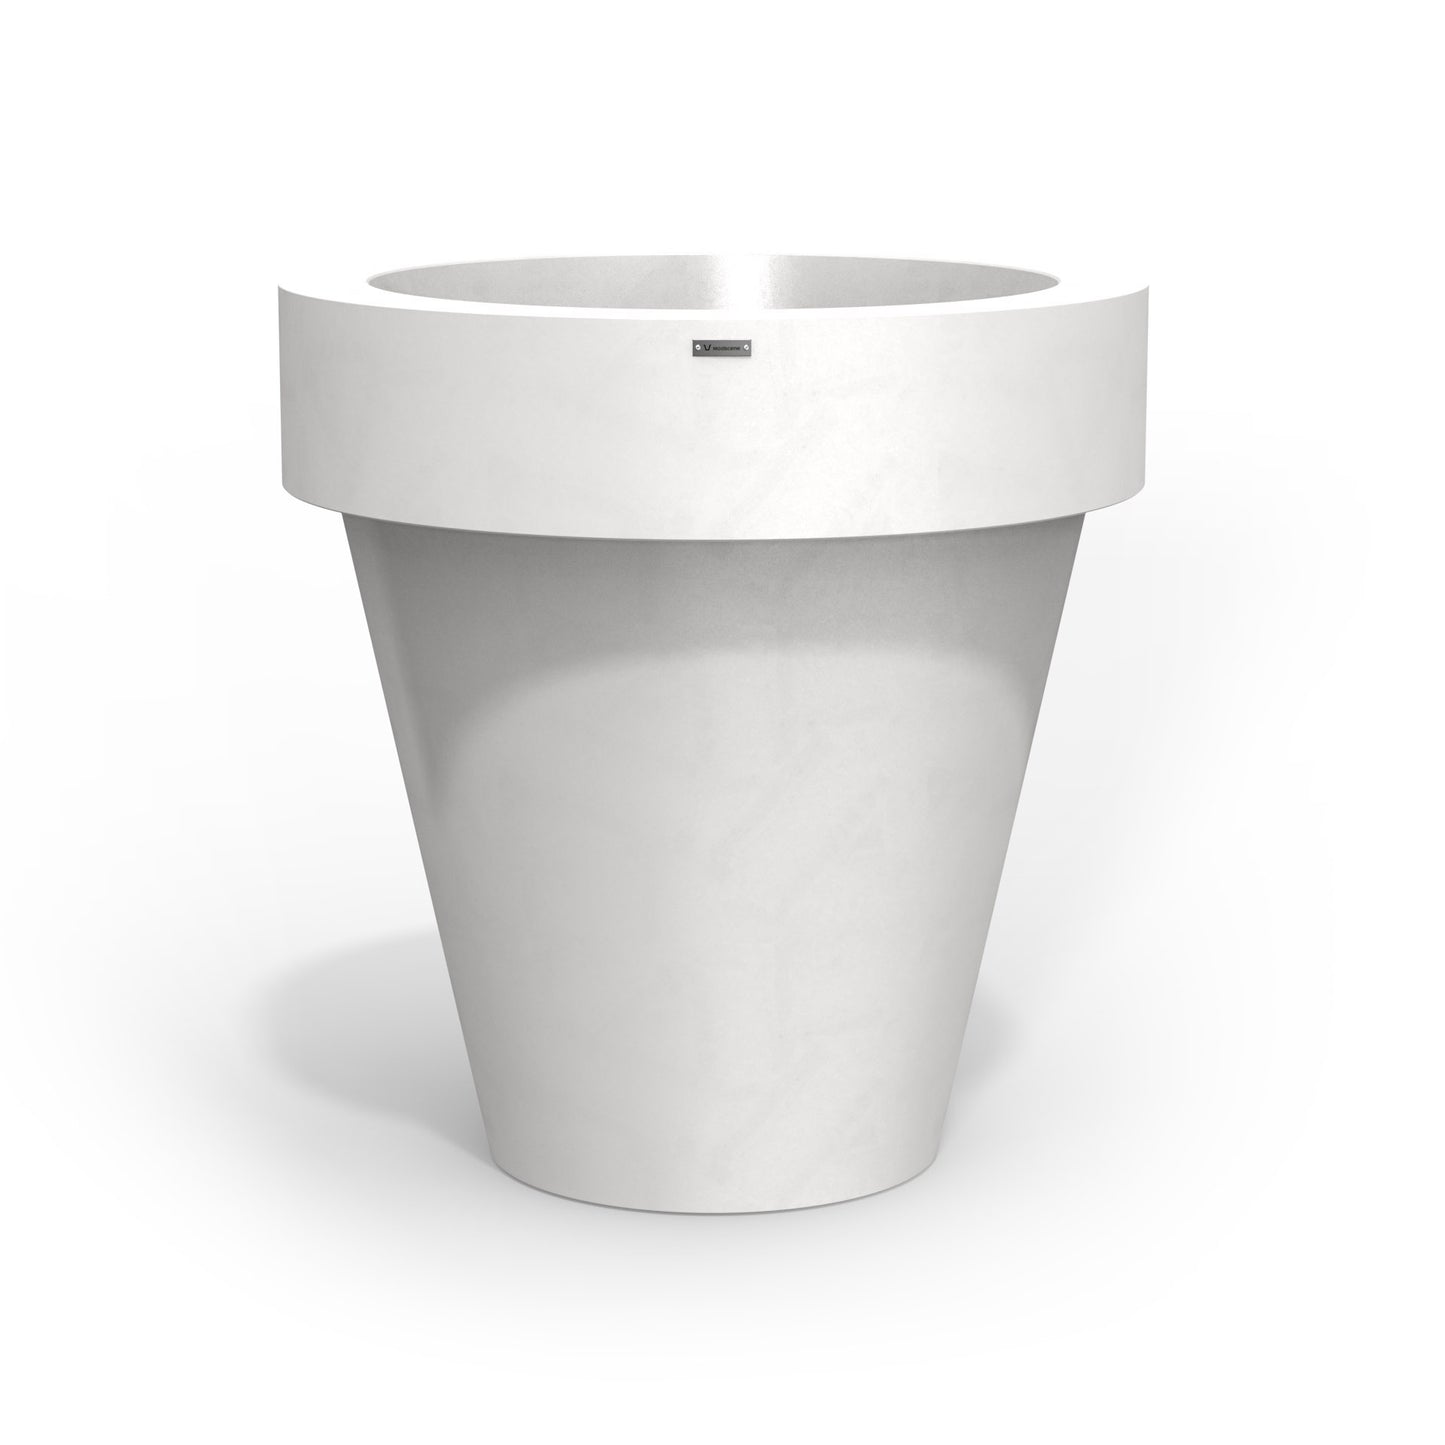 Extra large Modscene planter pot in a matte white colour. Made in NZ.